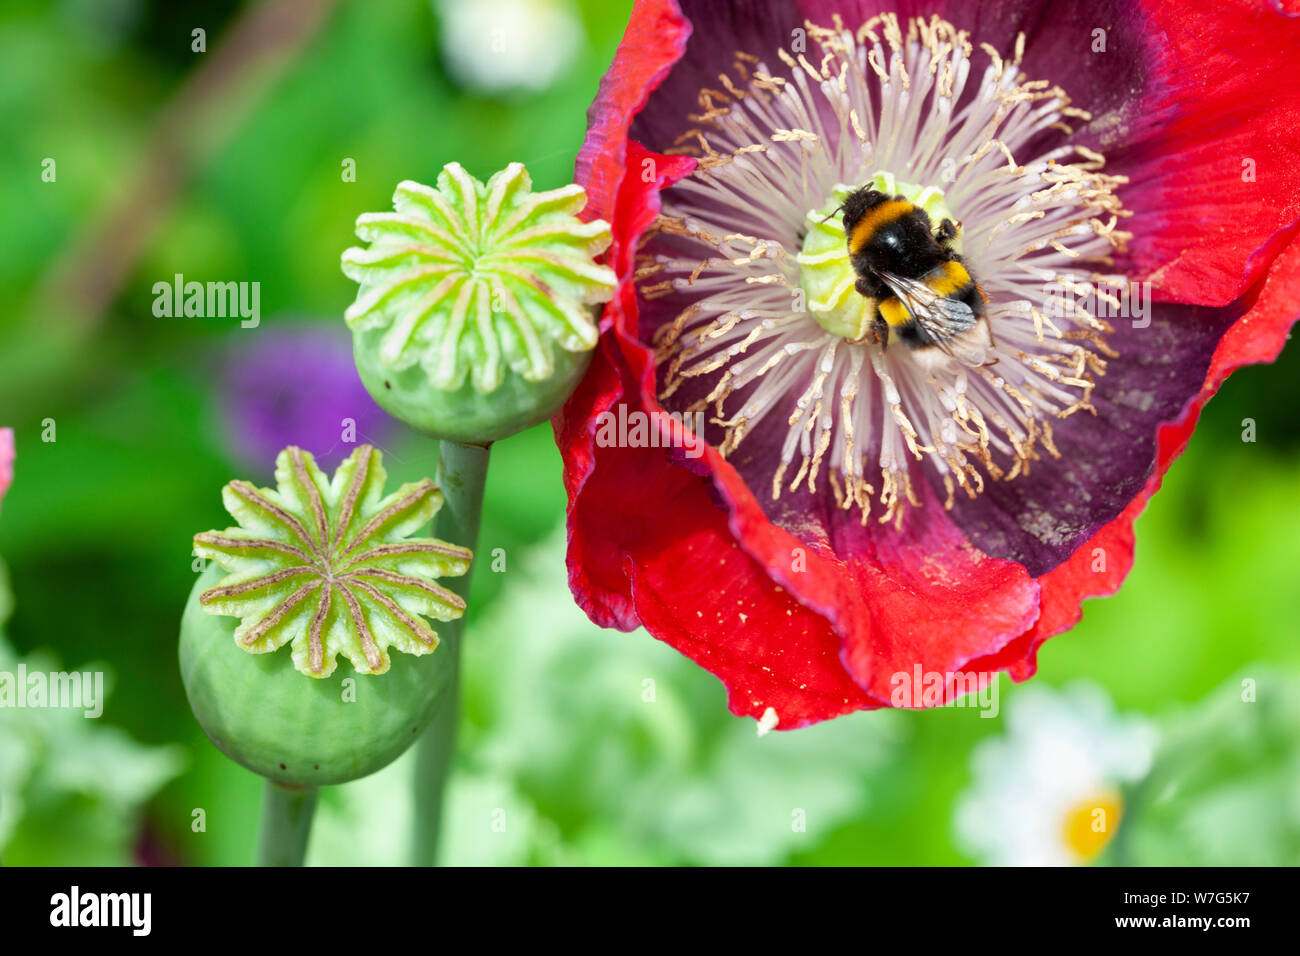 Poppy seed heads and red oriental poppy with bumble bee collecting nectar, East Sussex, England, United Kingdom, Europe Stock Photo